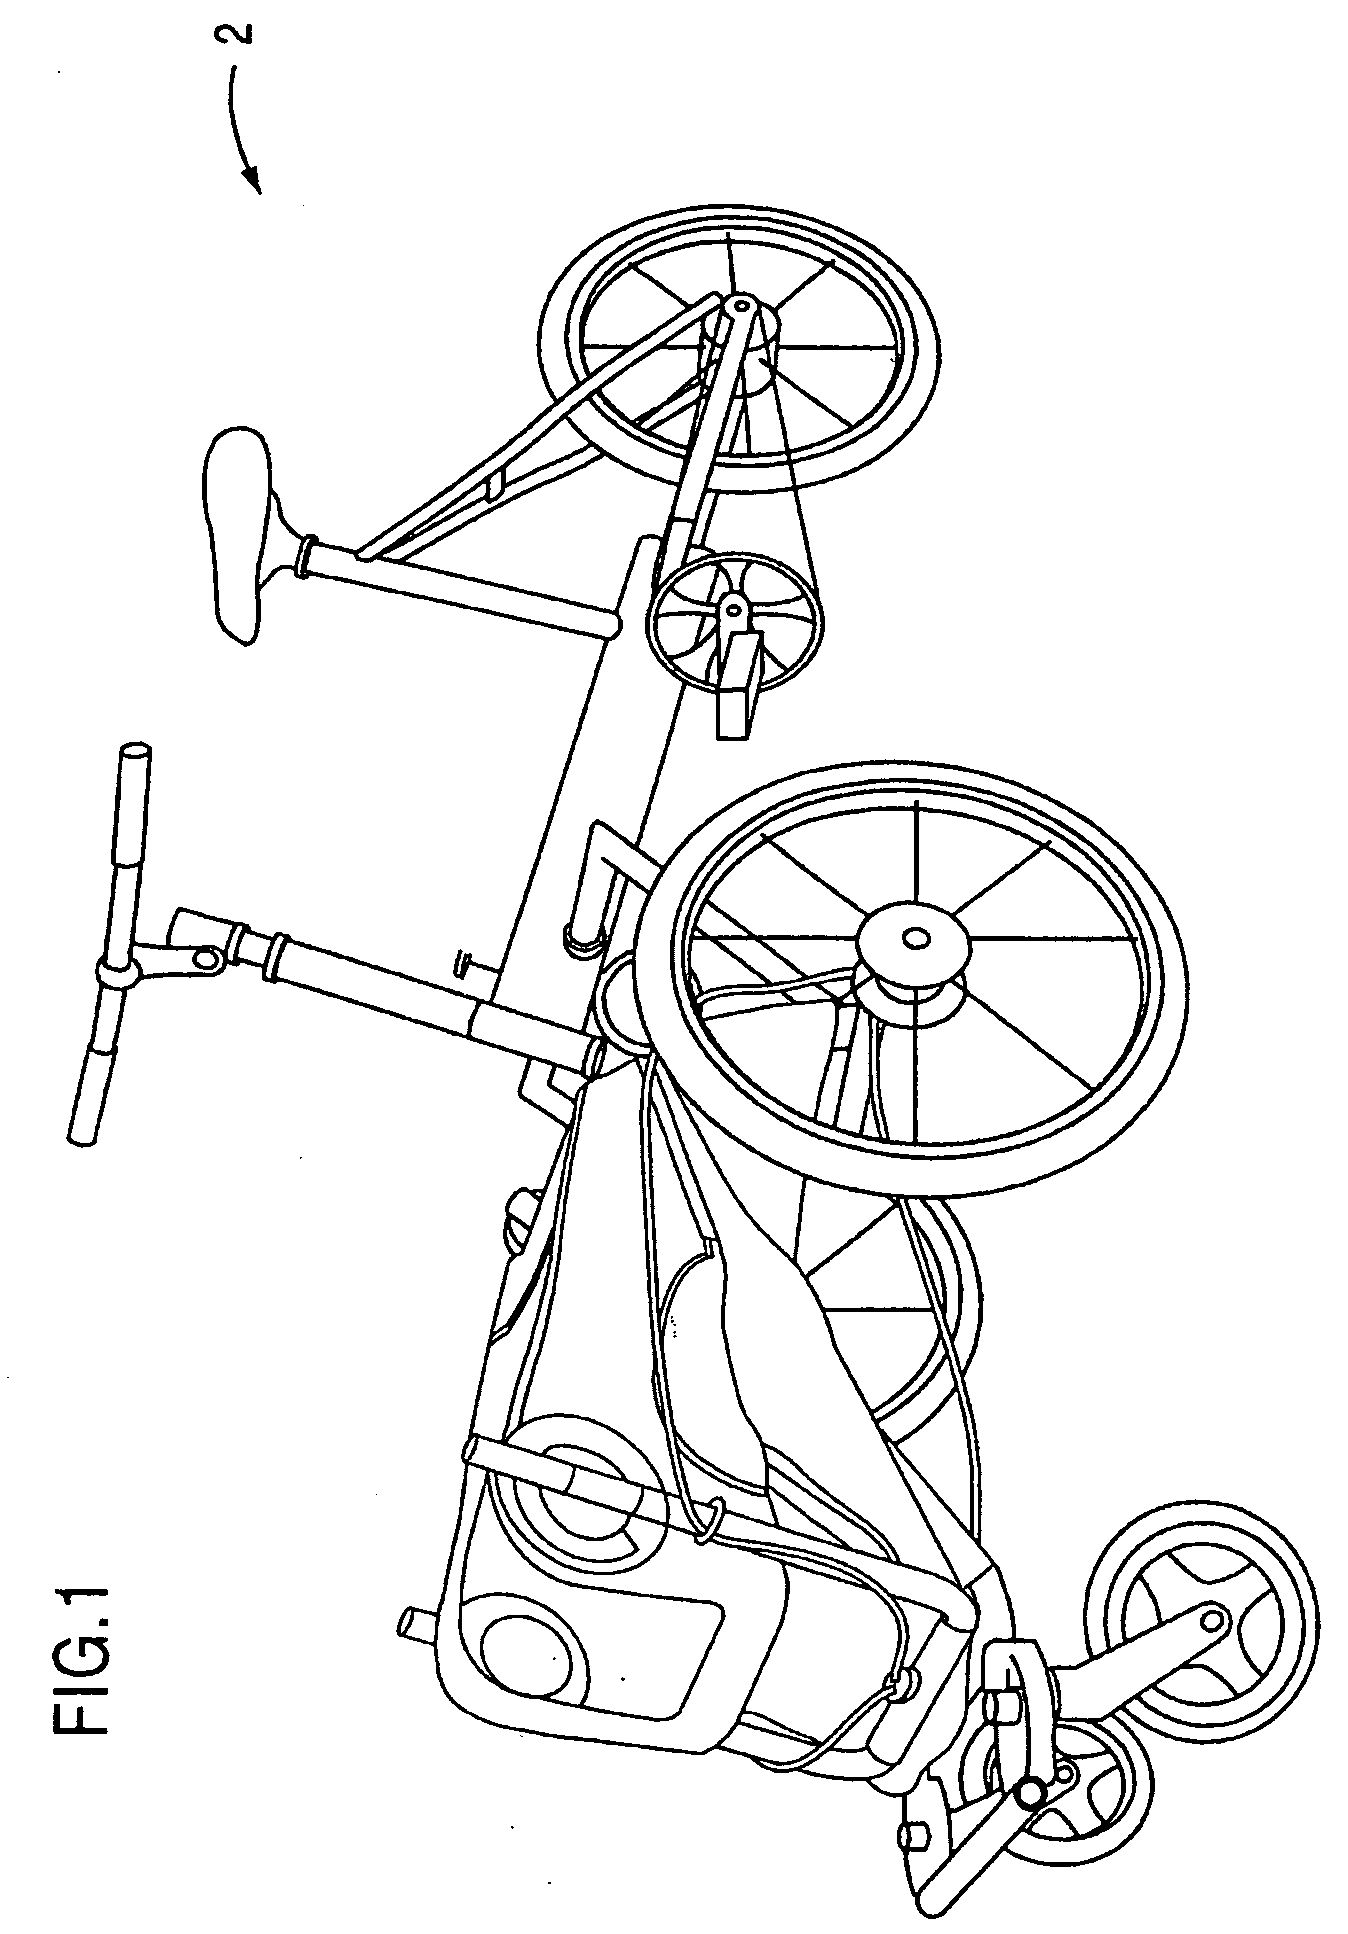 Convertible stroller-cycle